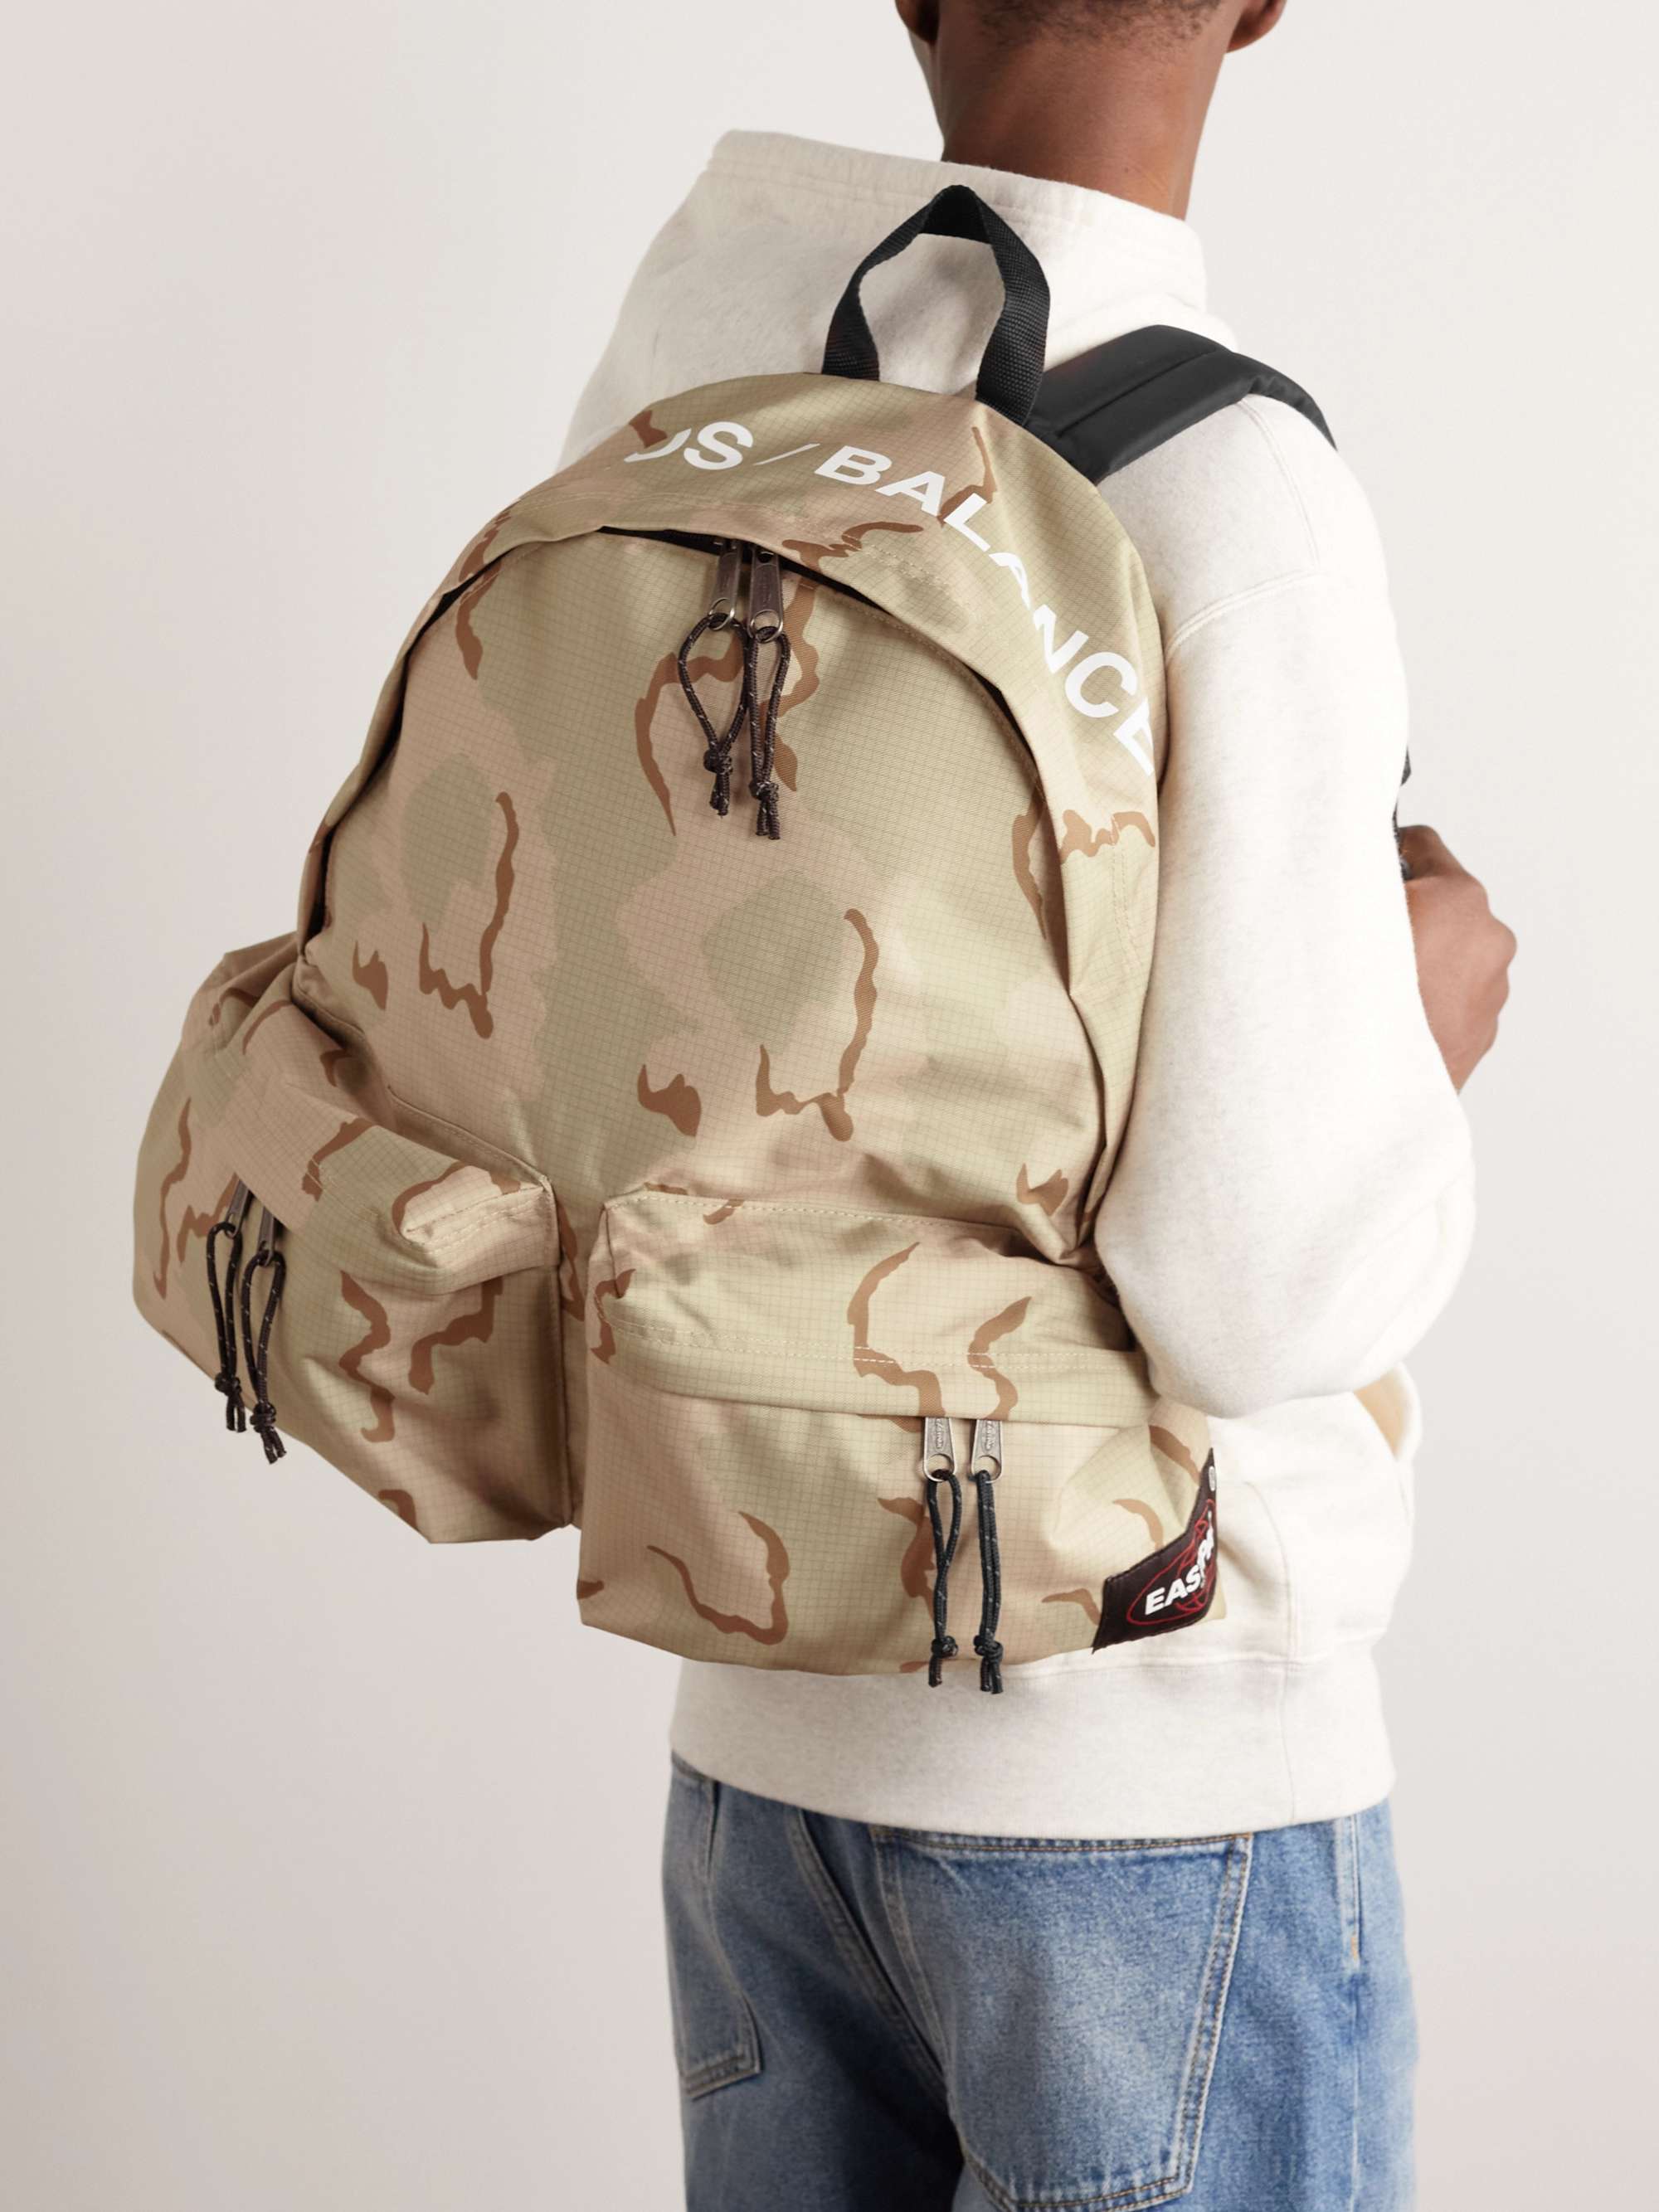 UNDERCOVER + Eastpak Chaos Balance Camouflage-Print Ripstop Backpack | MR  PORTER